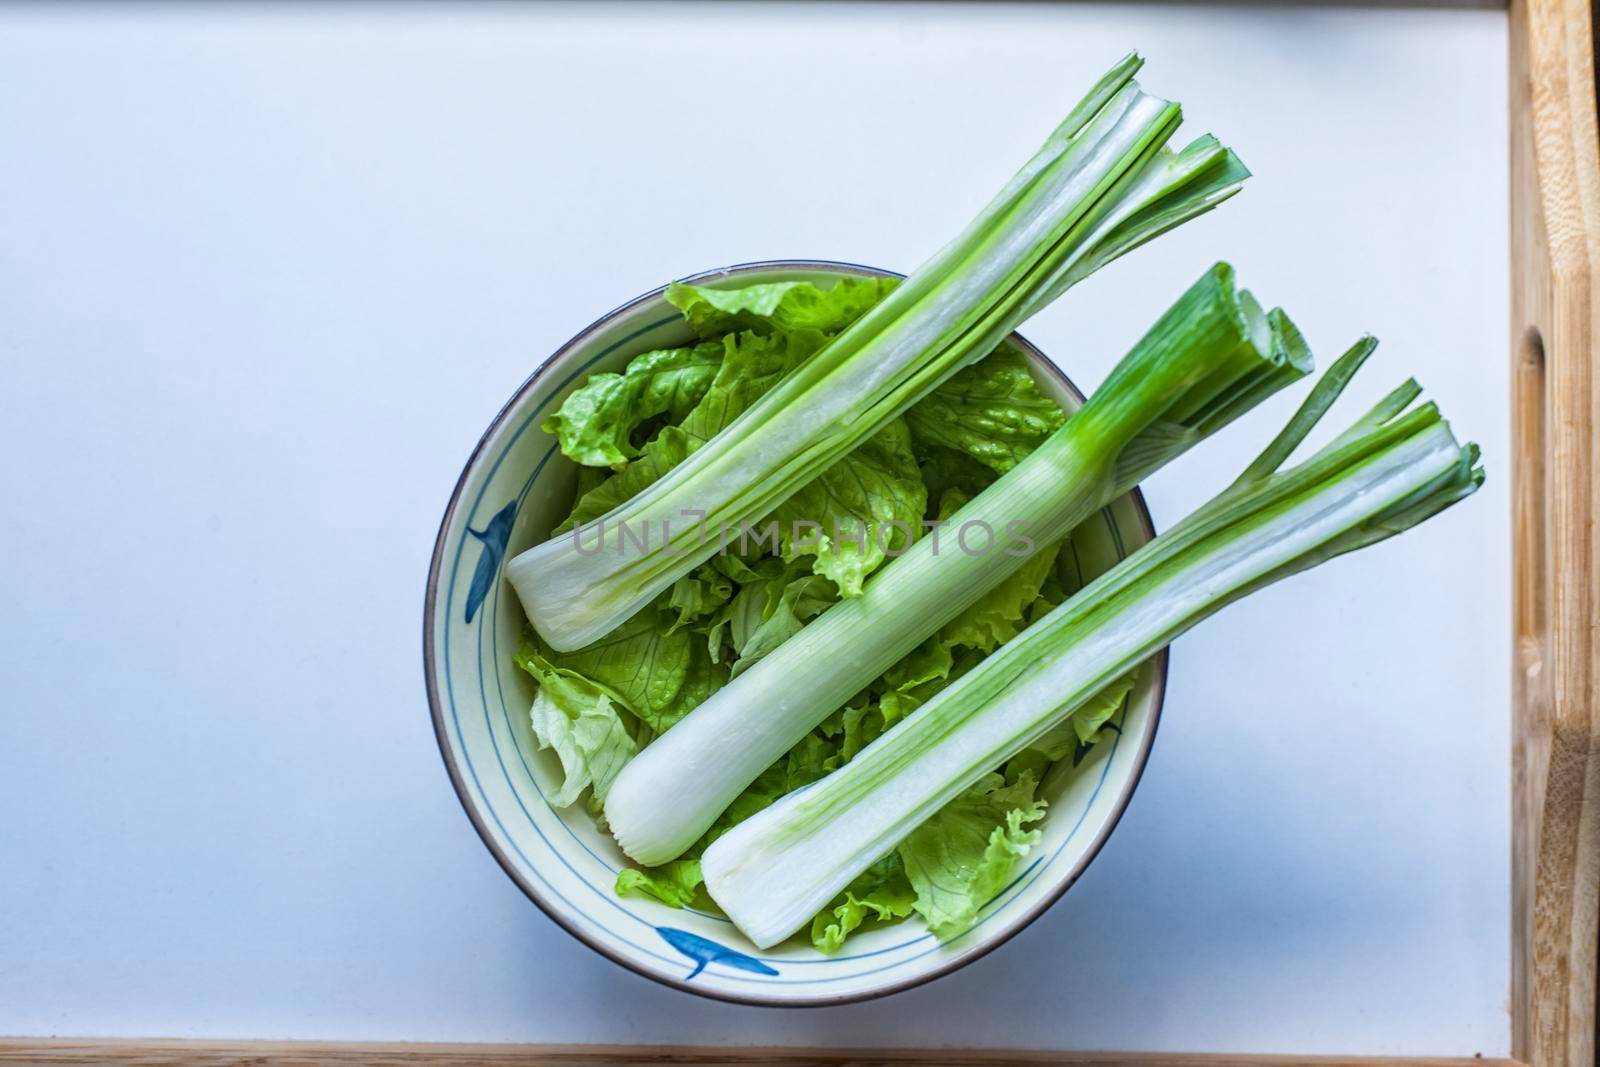 Green onion and lettuce in a bowl by zebra